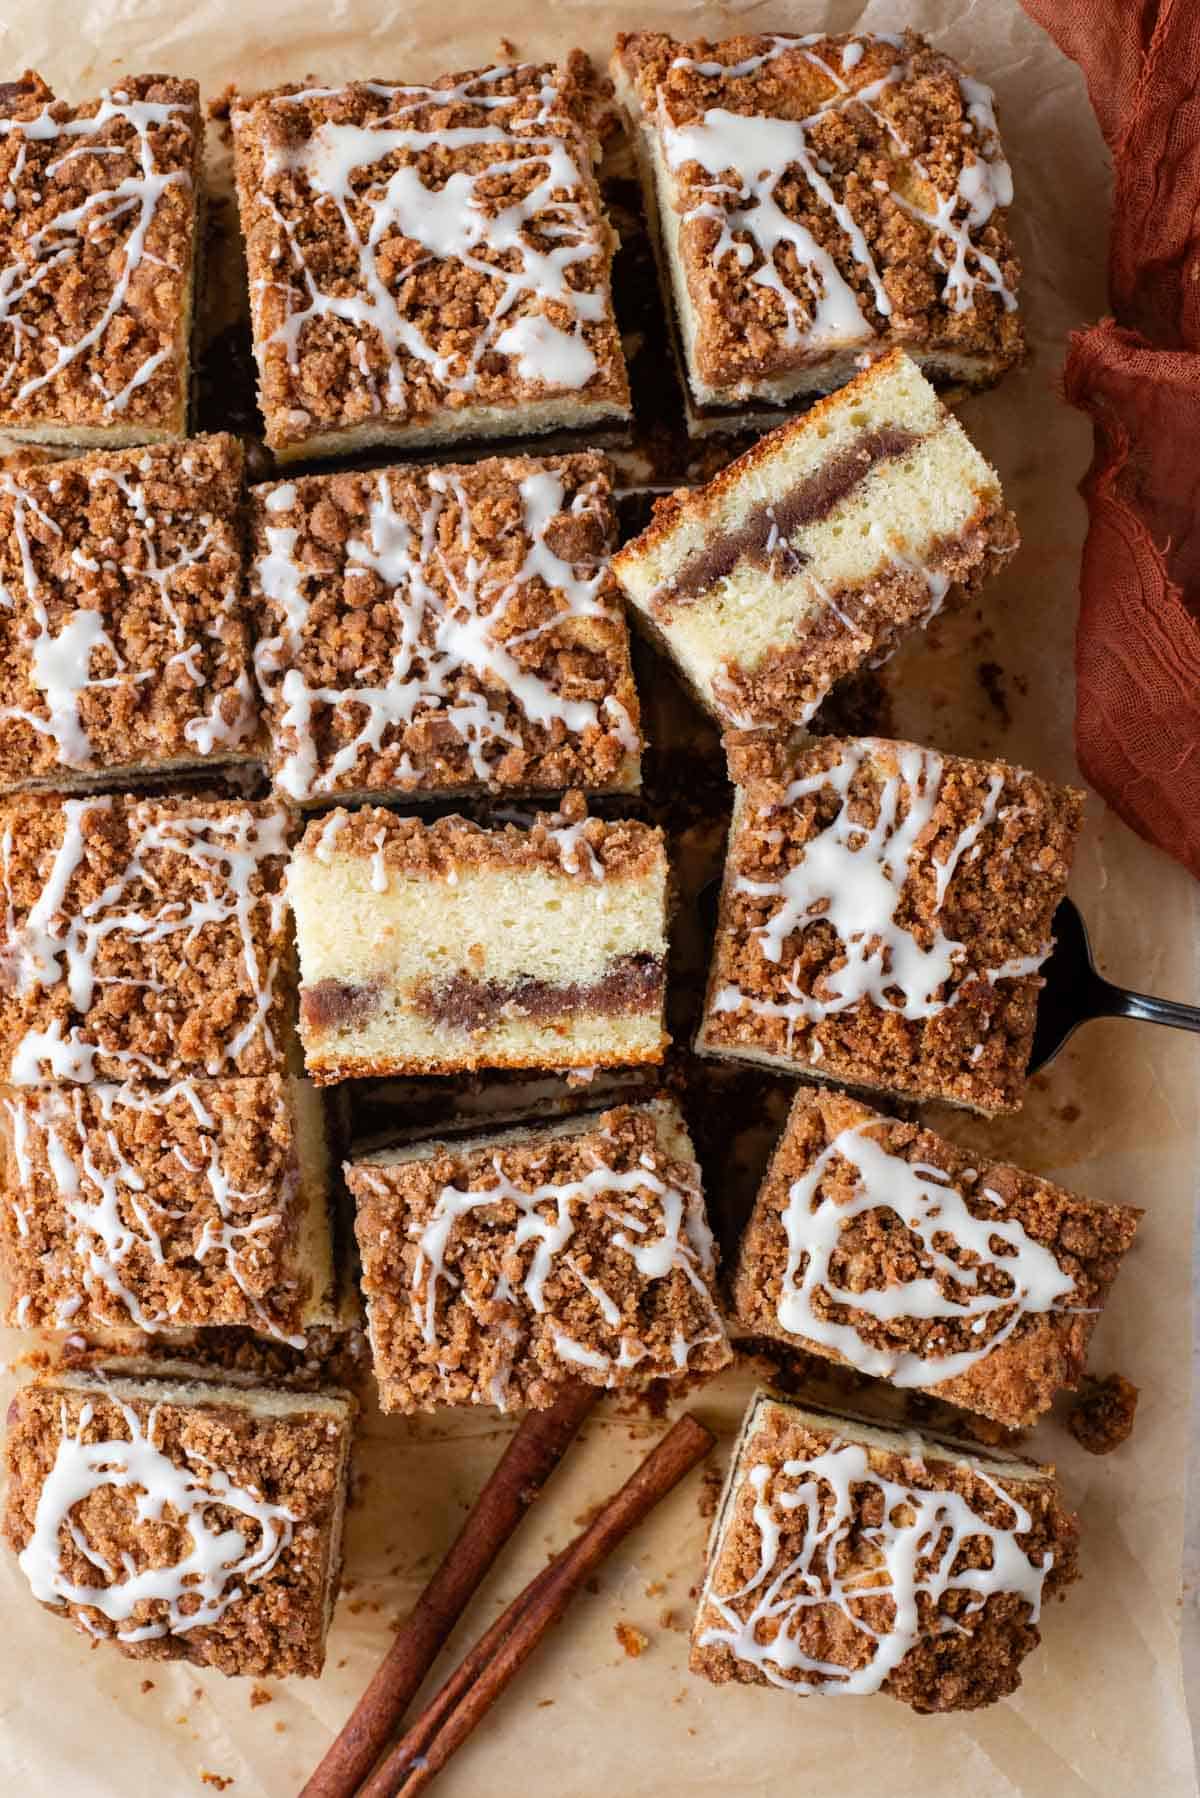 coffee cake slices arranged on brown paper with some on their sides, a fork, orange towel and cinnamon sticks